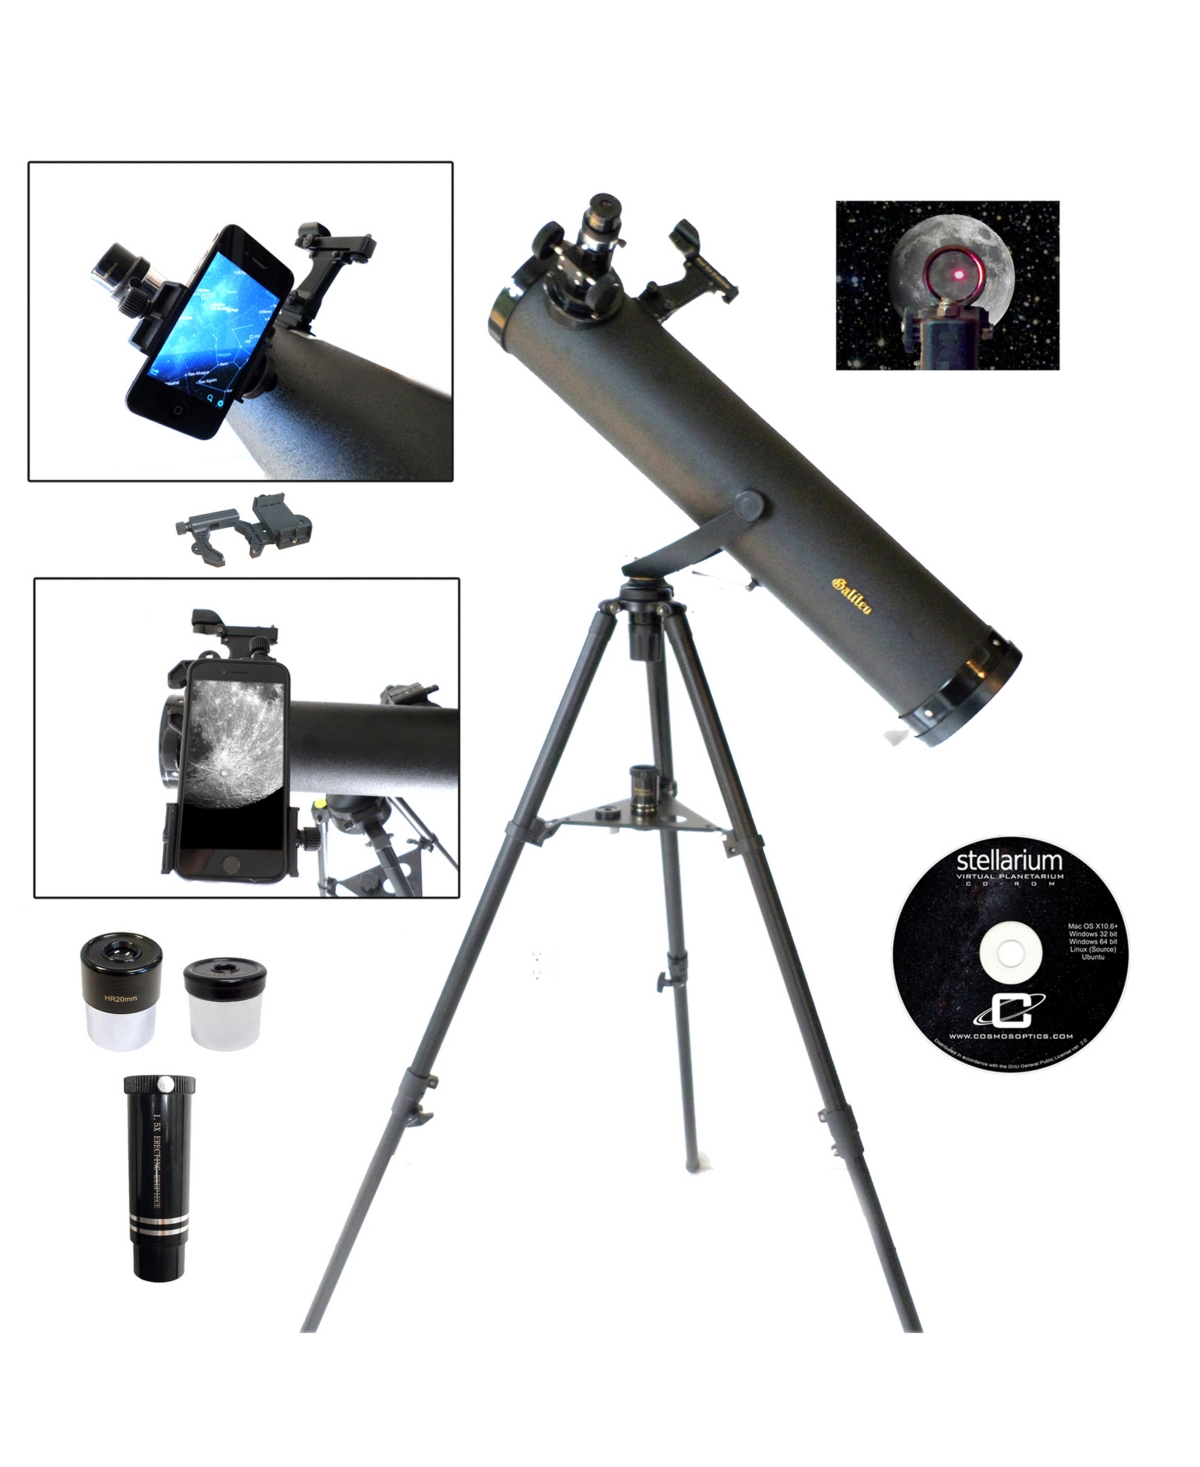 Galileo 800 X 95mm Astronomical Telescope And Red Dot Finder Scope And Stellarium Cd In Black